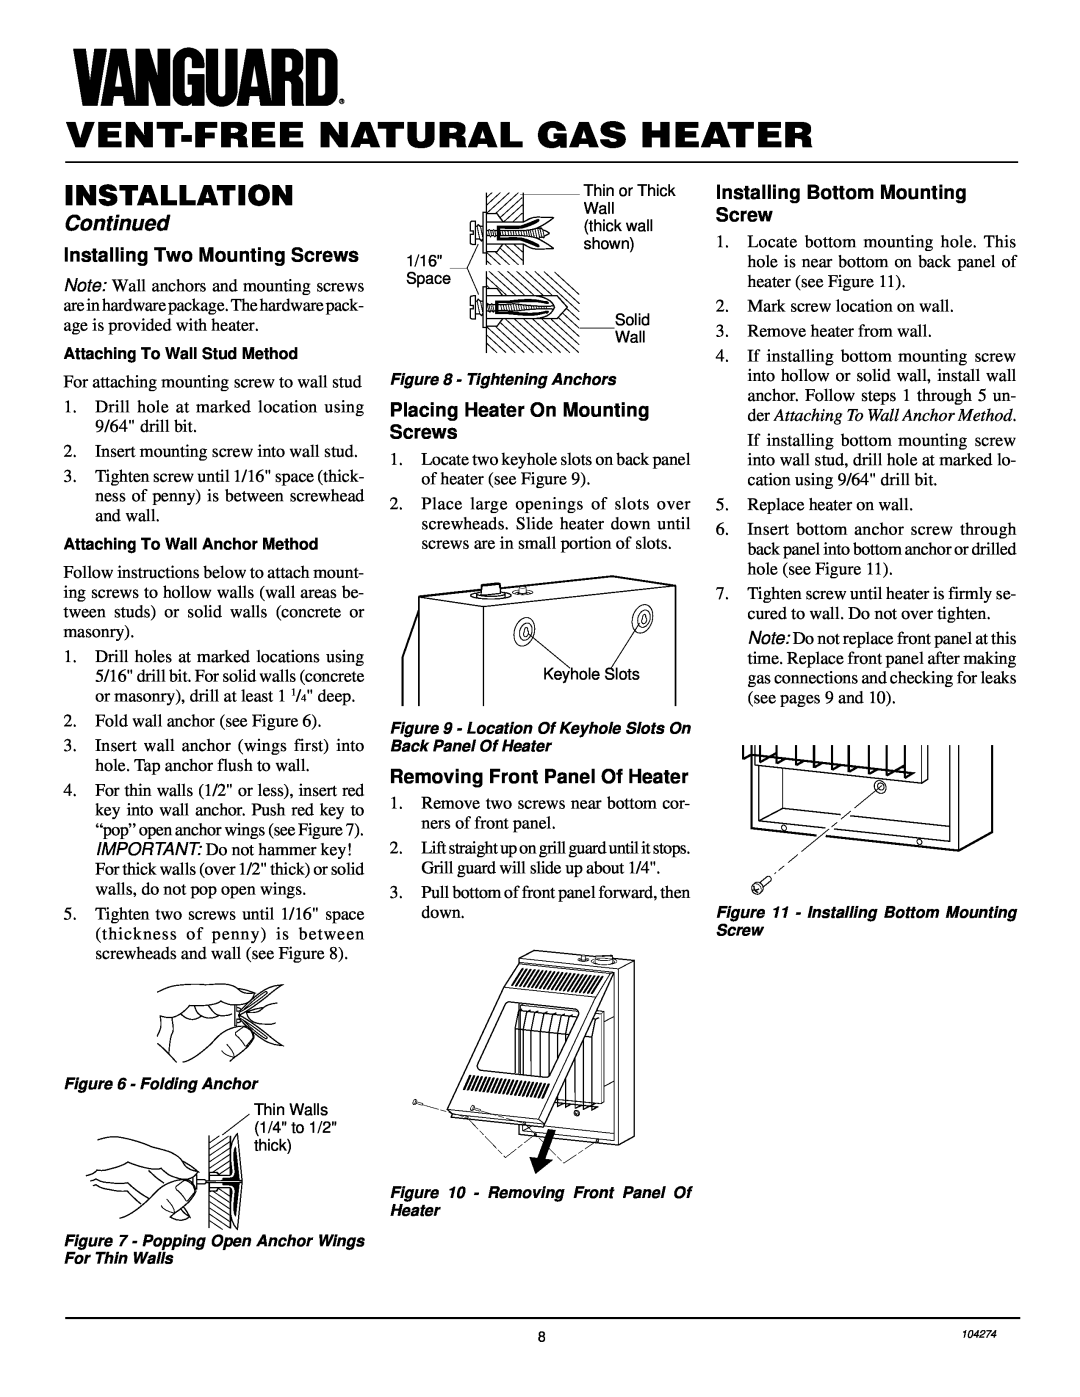 Desa VN6D installation manual Vent-Free Natural Gas Heater, Installation, Continued, Installing Two Mounting Screws 